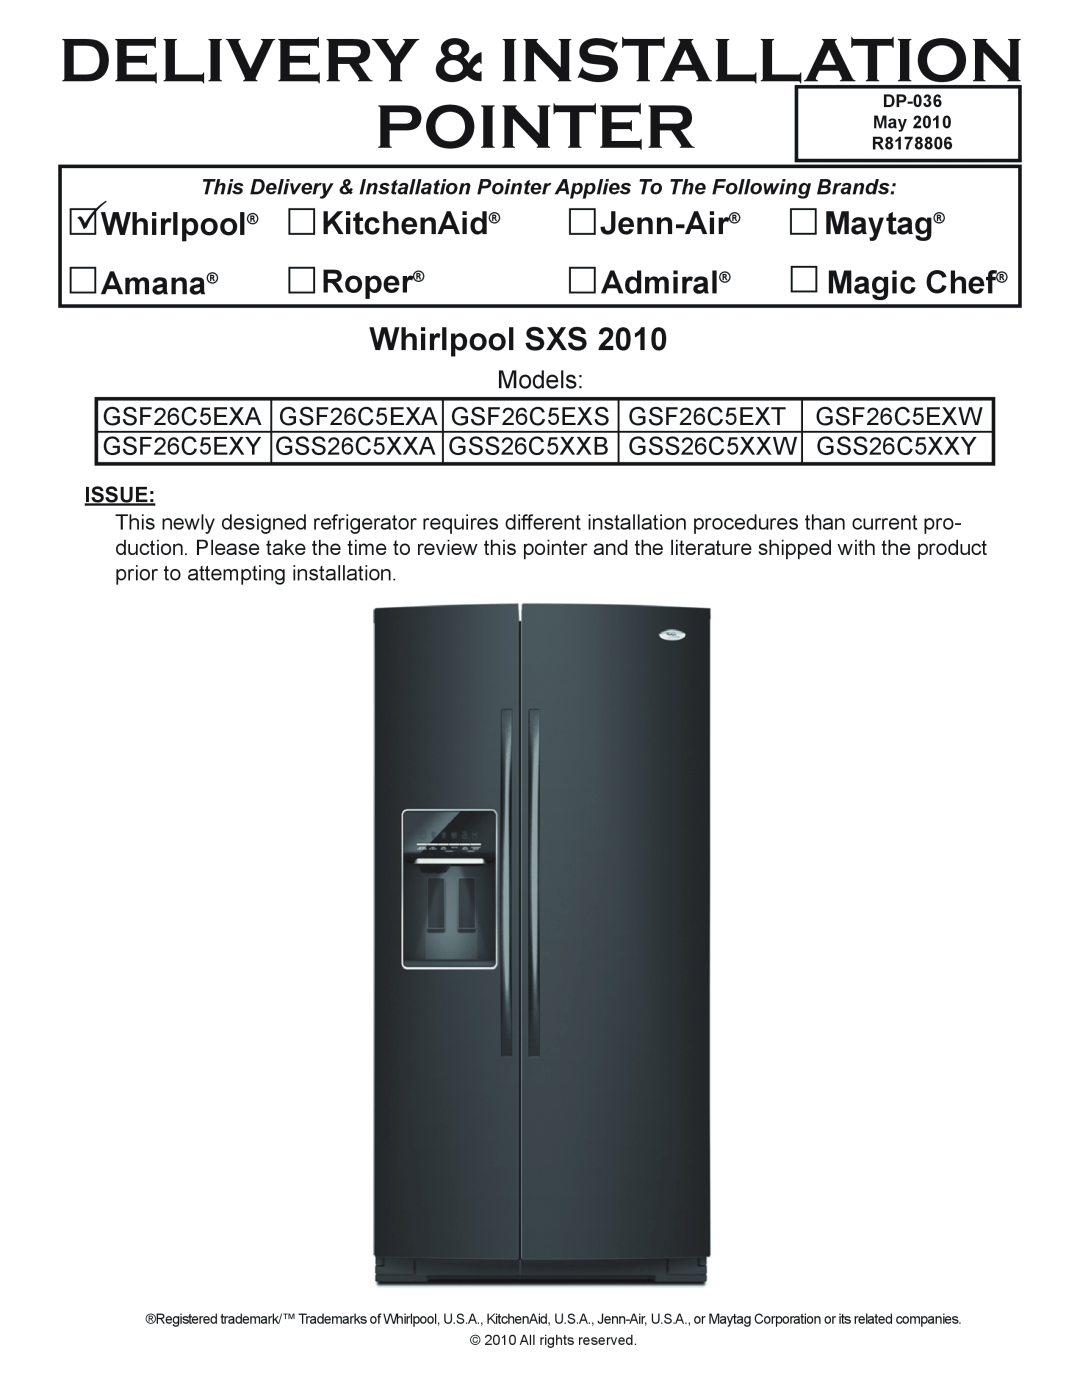 Whirlpool GSF26C5EXA manual Issue, Delivery & Installation, POINTER May, Whirlpool, KitchenAid, Jenn-Air, Maytag, Amana 